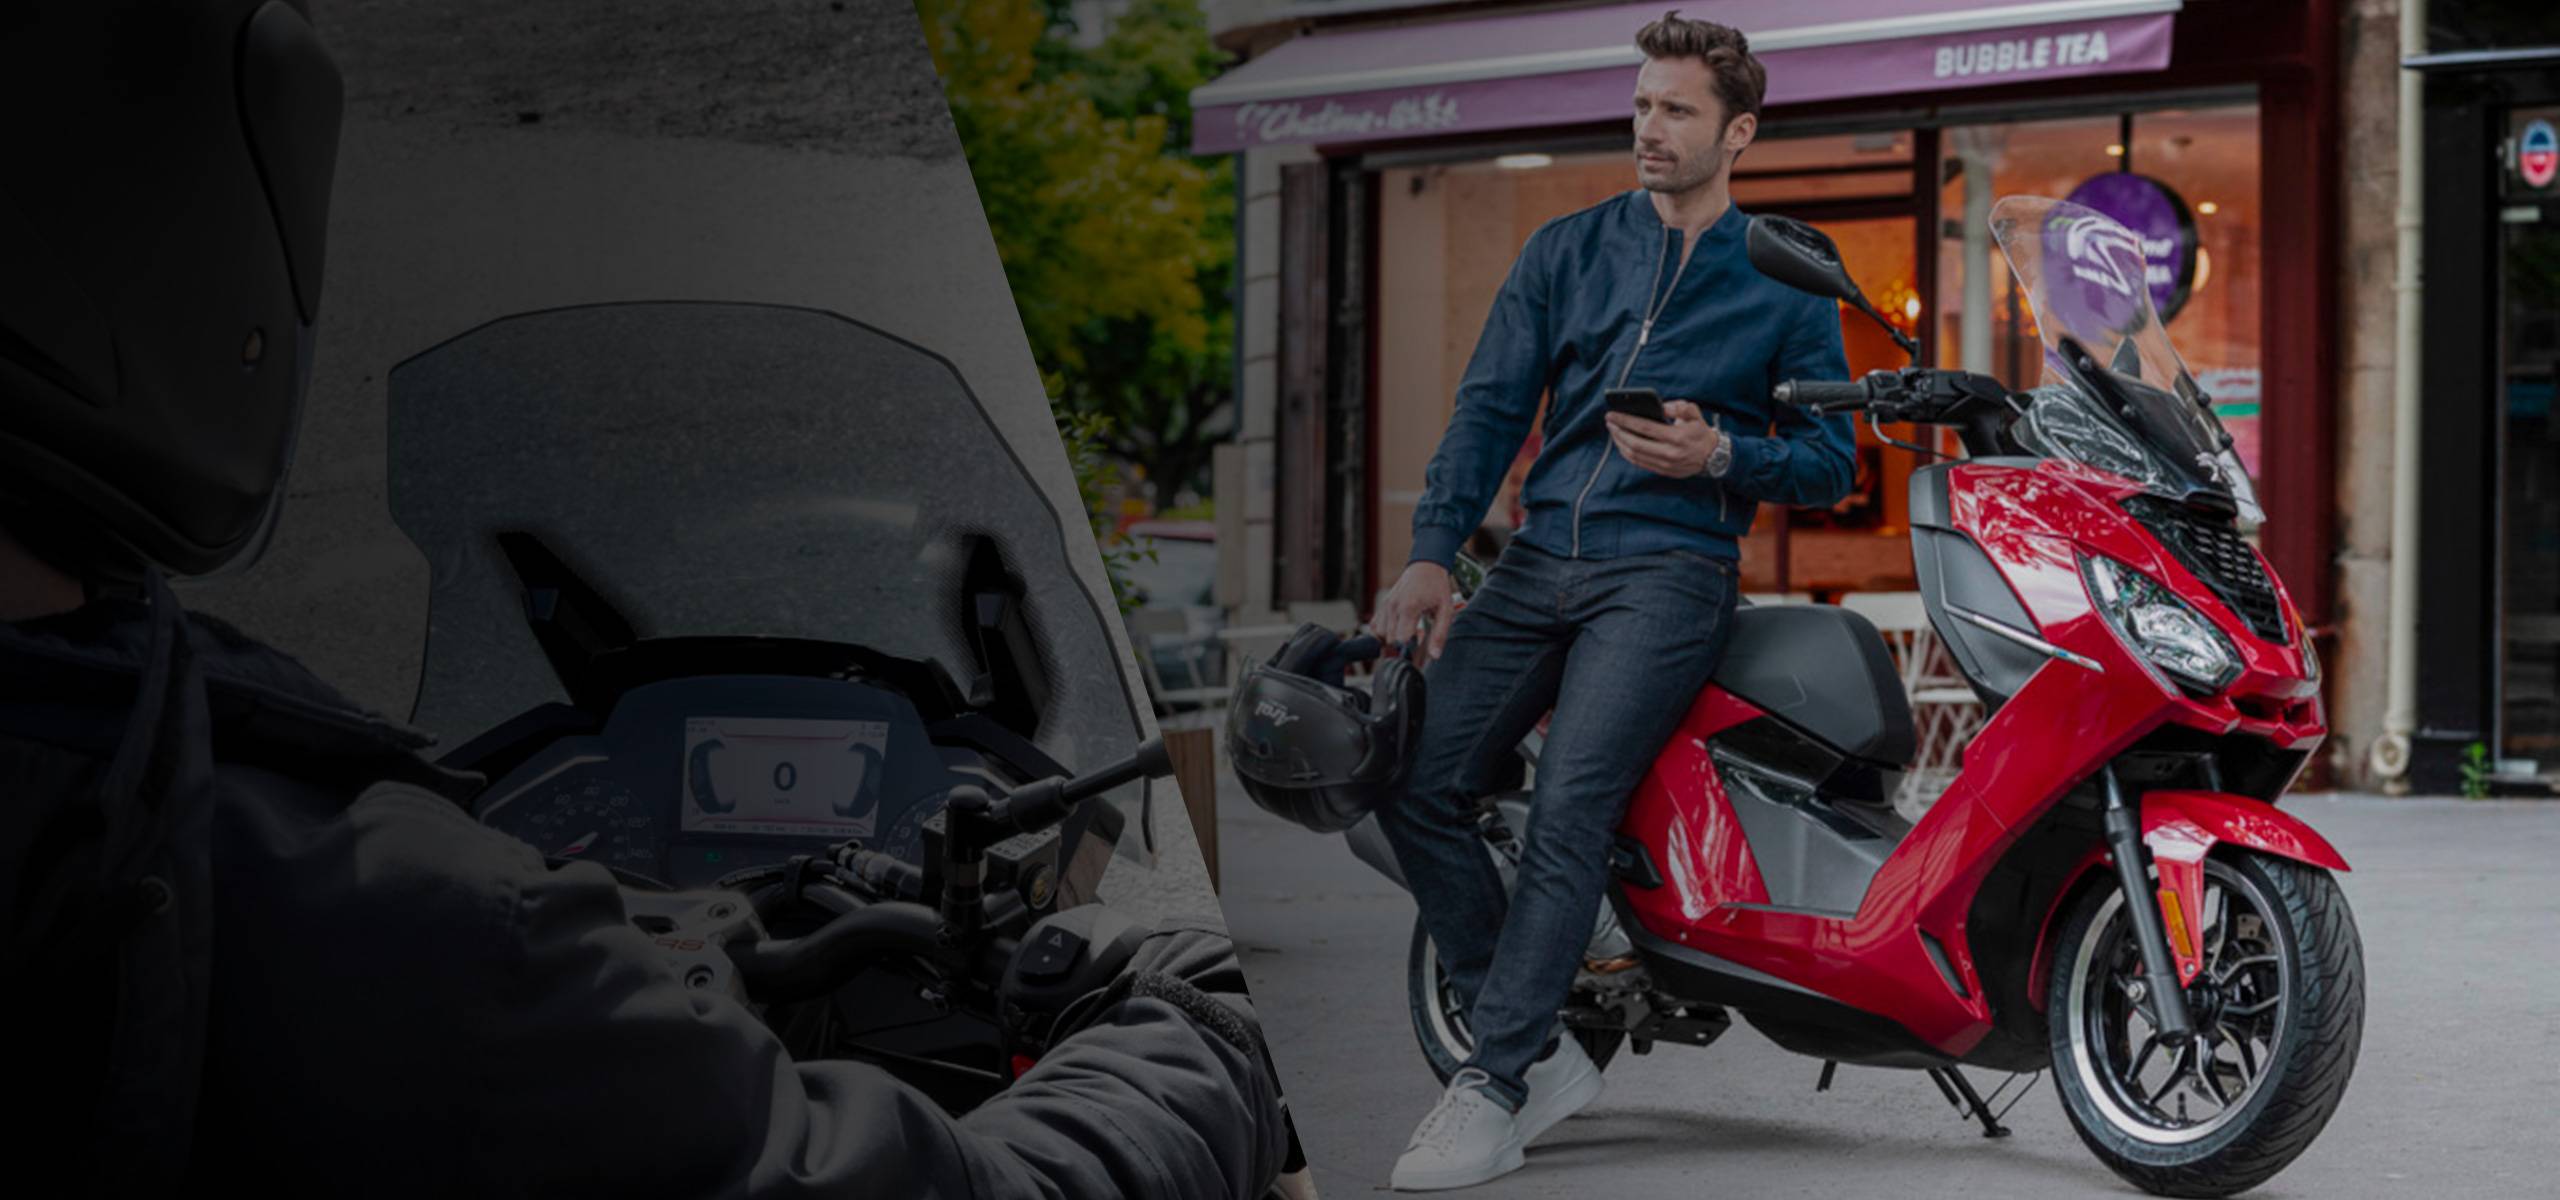 GET £500 TO SPEND ON CLOTHING & ACCESSORIES at Frasers Motorcycles